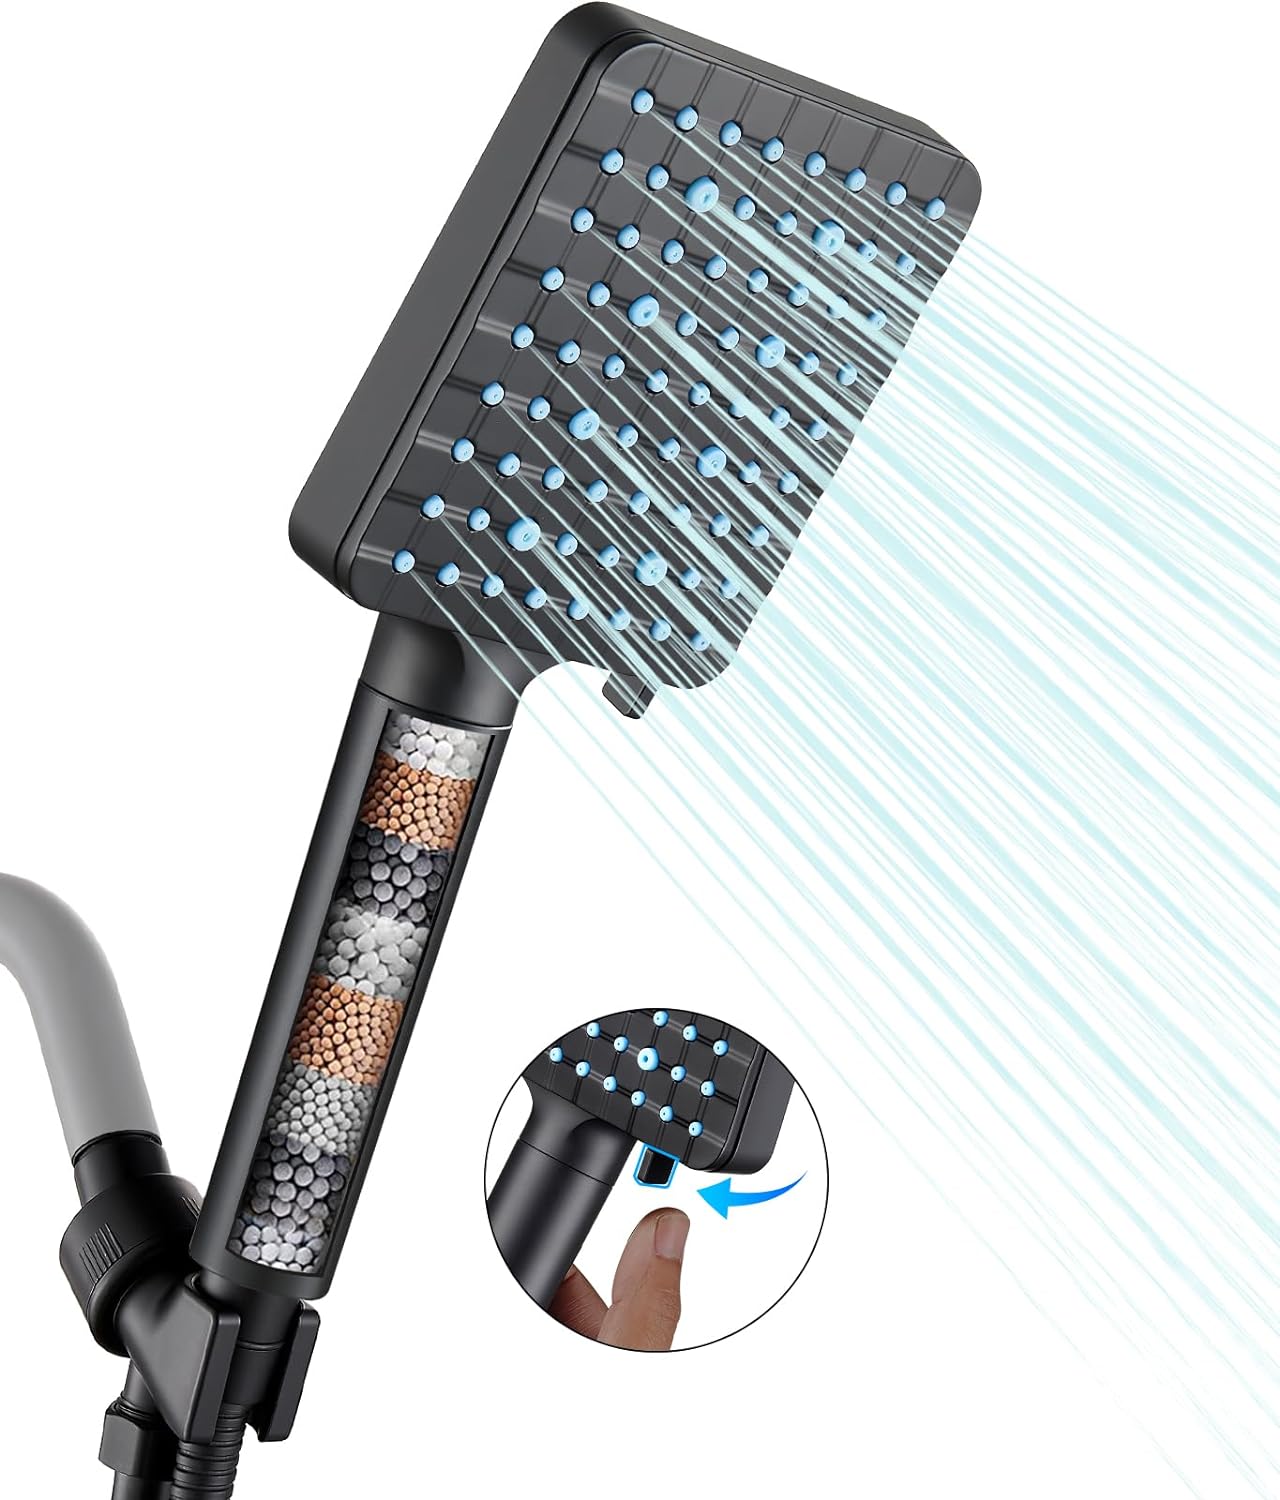 Filtered Shower Head with Handheld, High Pressure 6 Spray Mode Showerhead with Filters, Water Softener Filters Beads for Hard Water - Remove Chlorine - Reduces Dry Itchy Skin, Matte Black